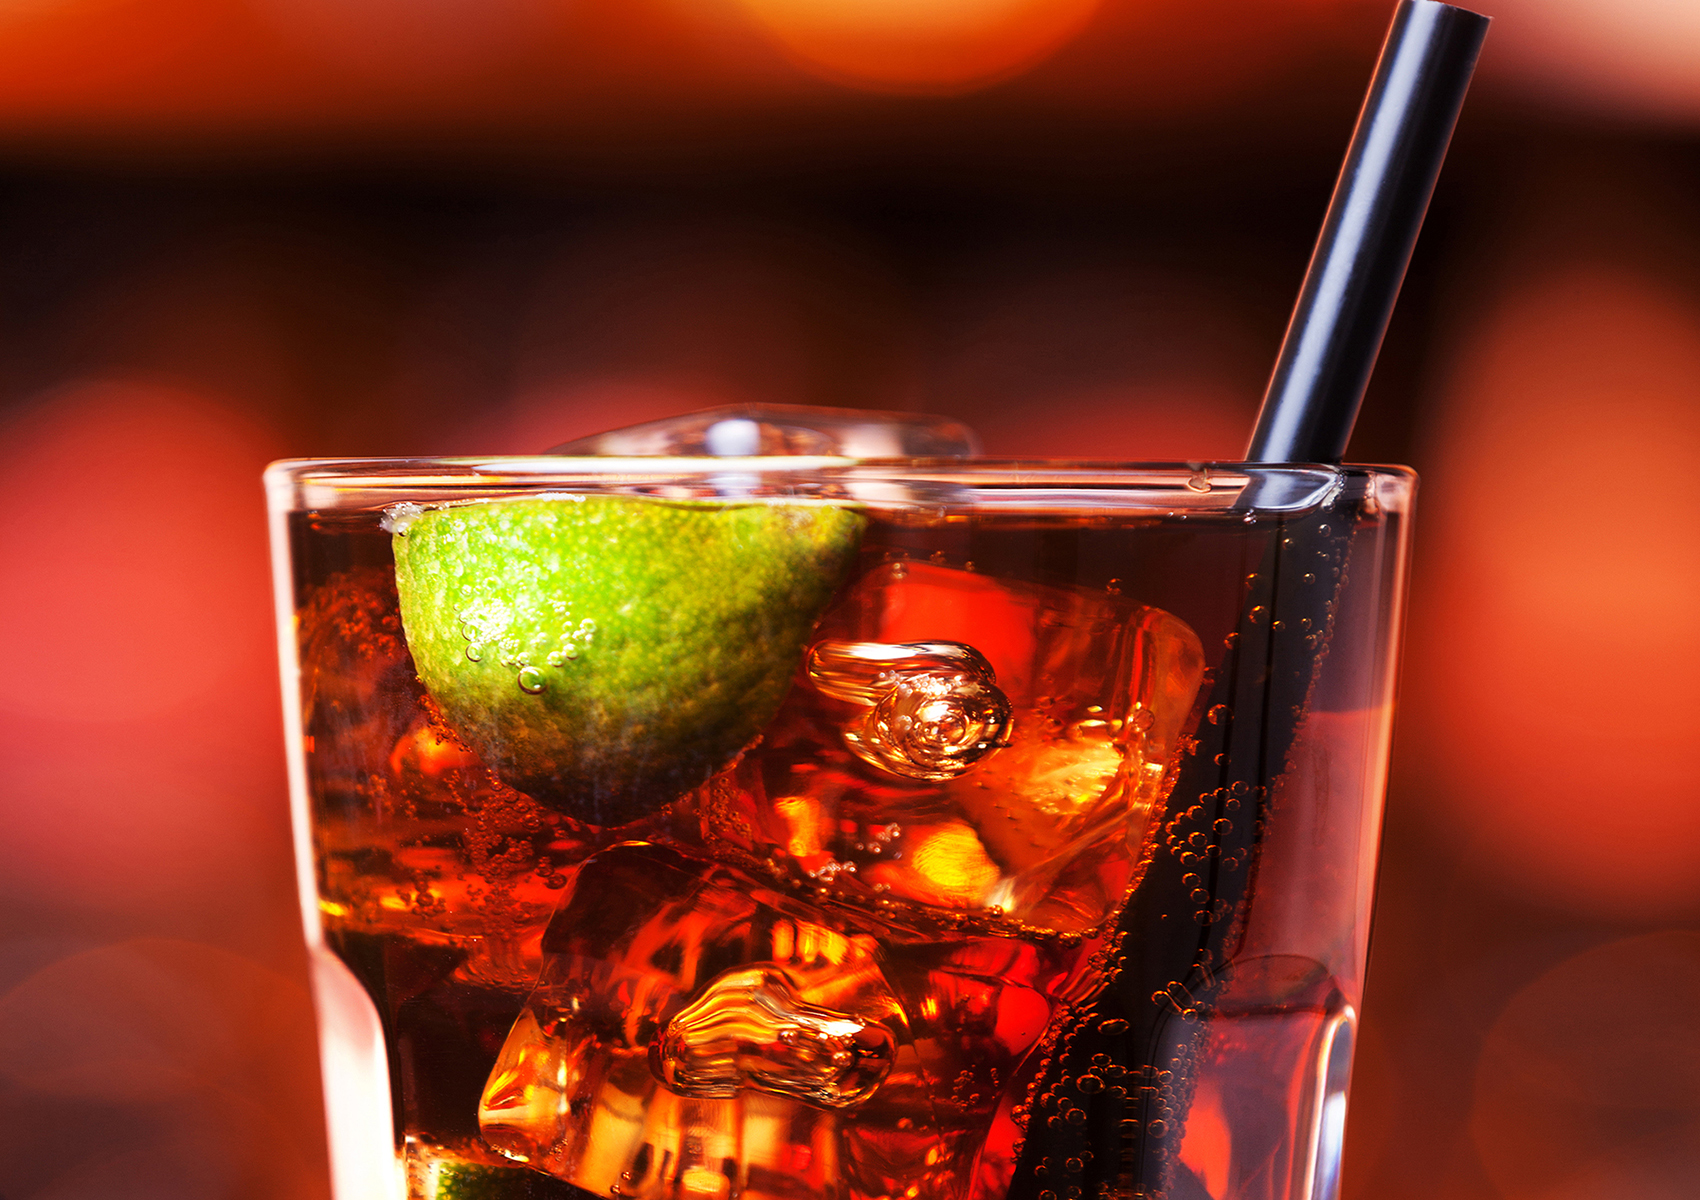 Cuba libre is a famouse cuban cocktail. It is made of: